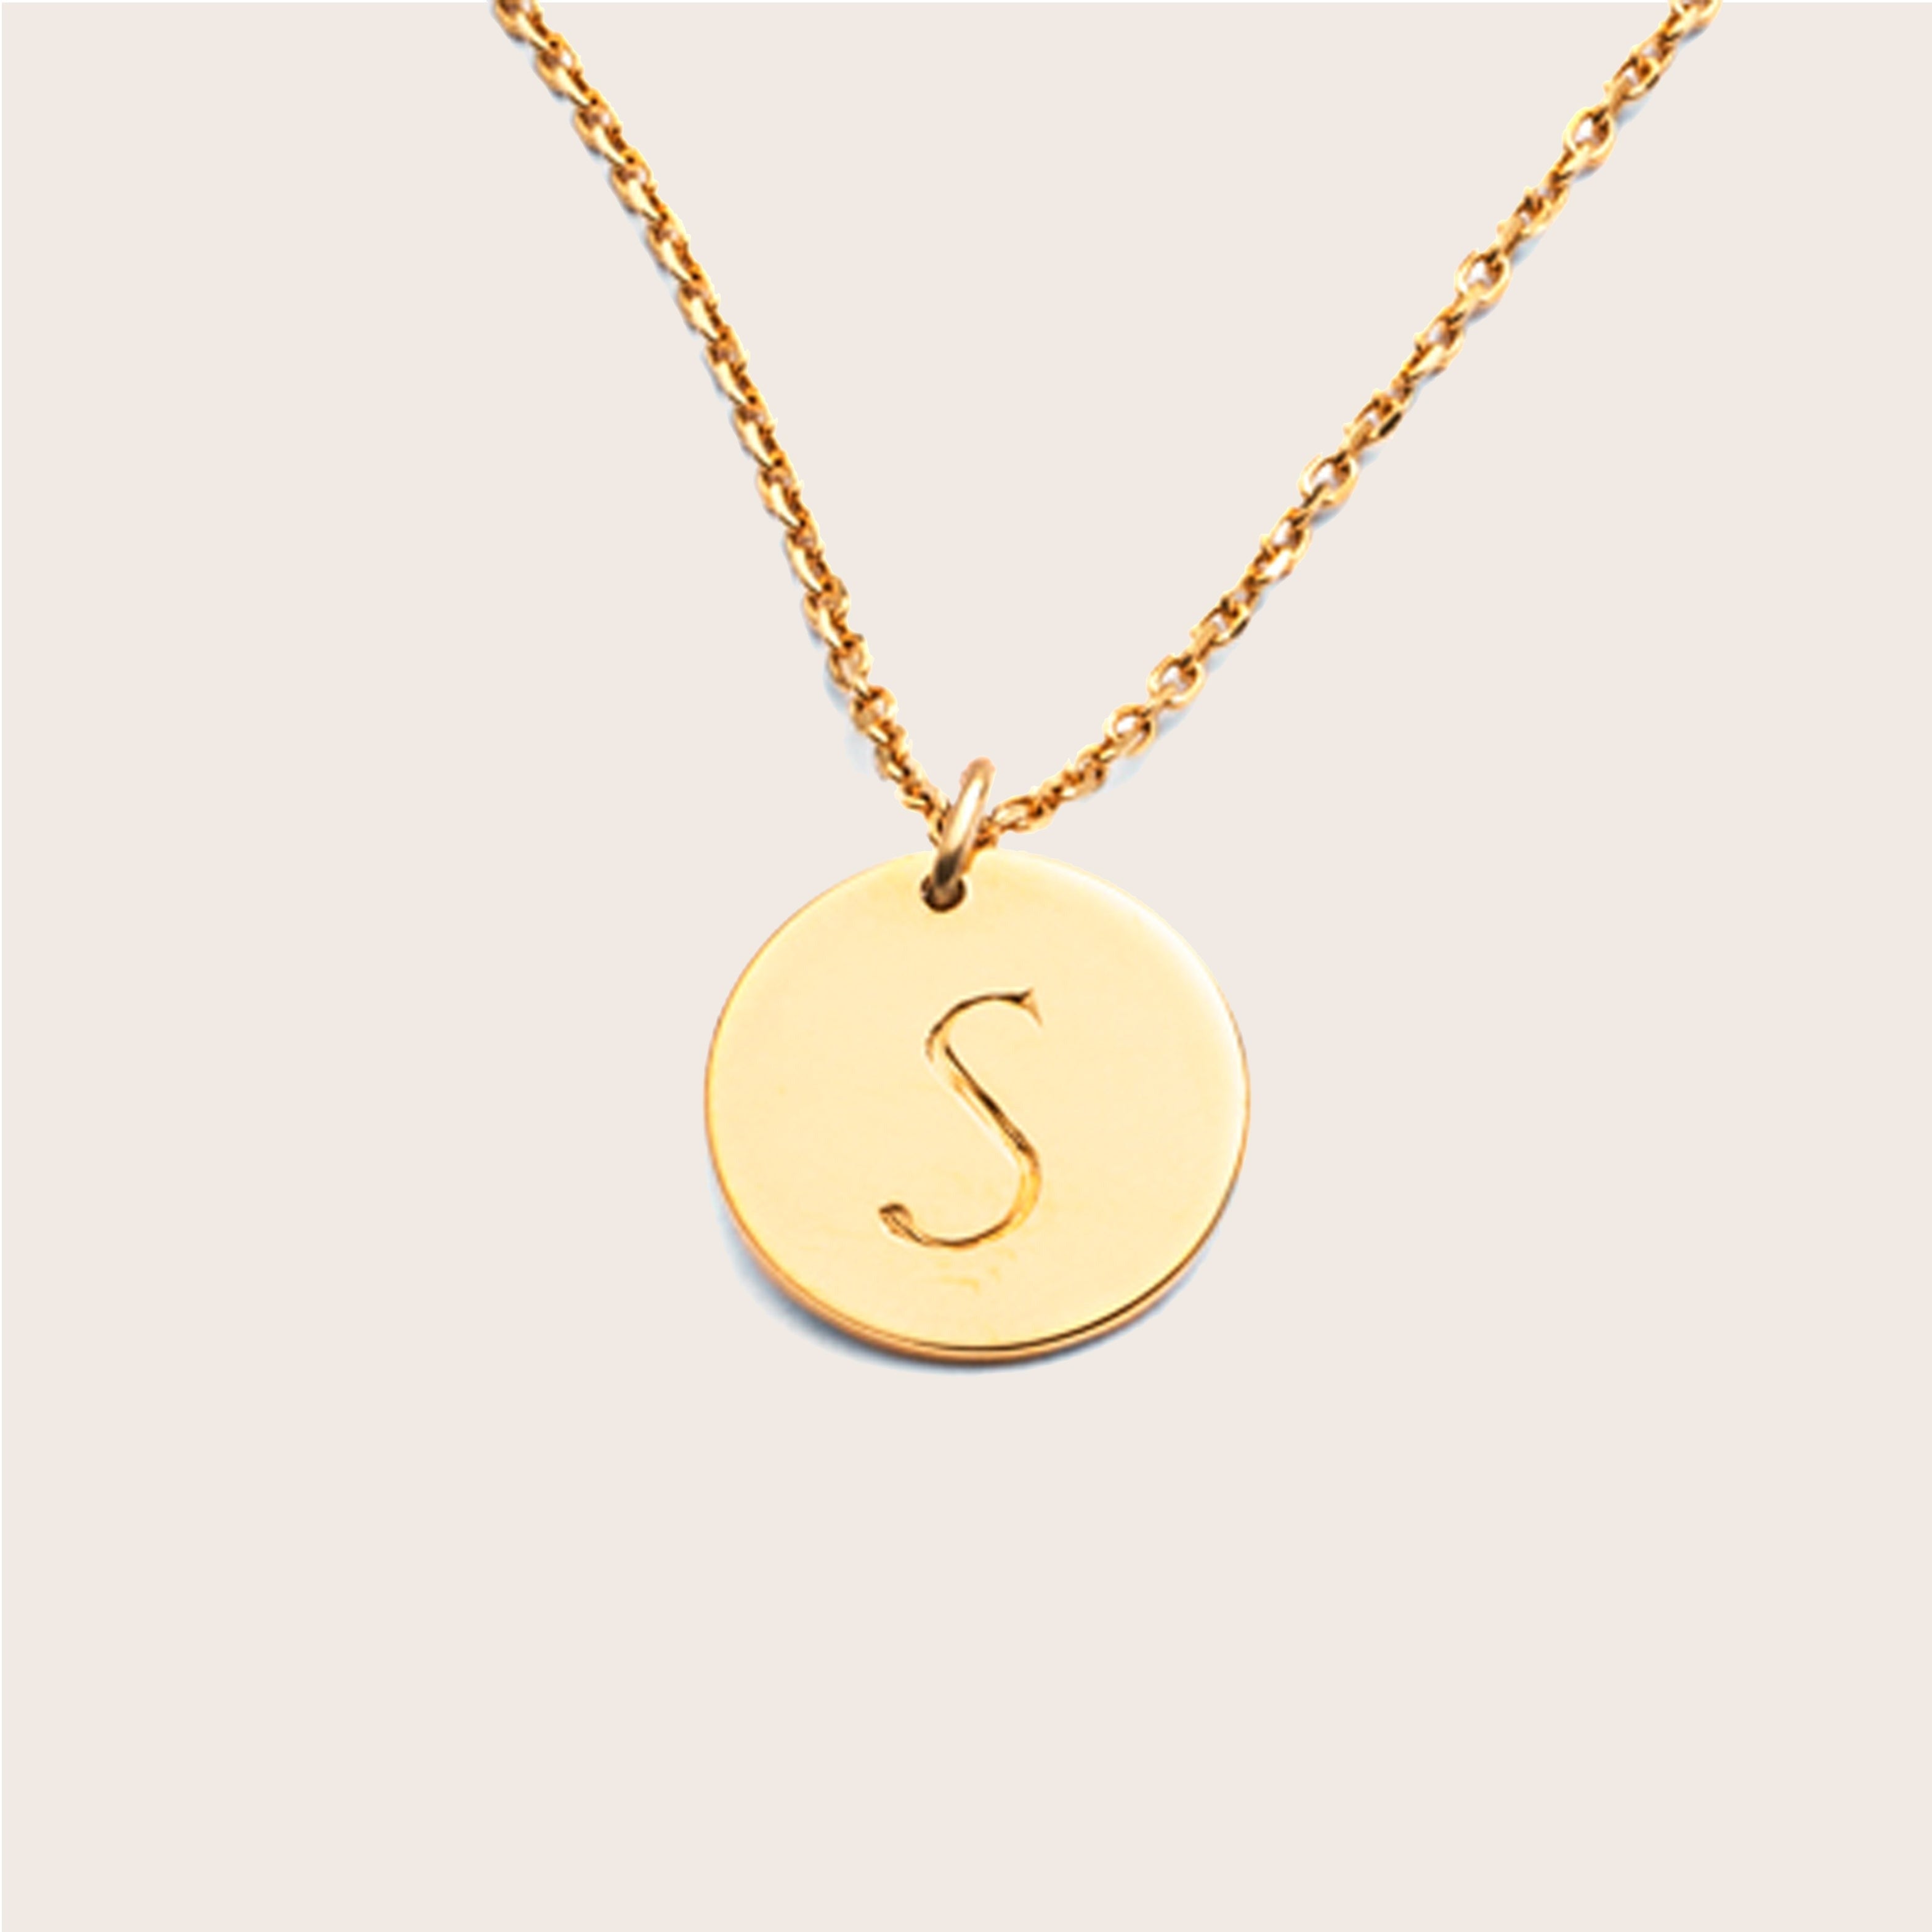 Double Sided Initial Disc Necklace - harryrockslondon